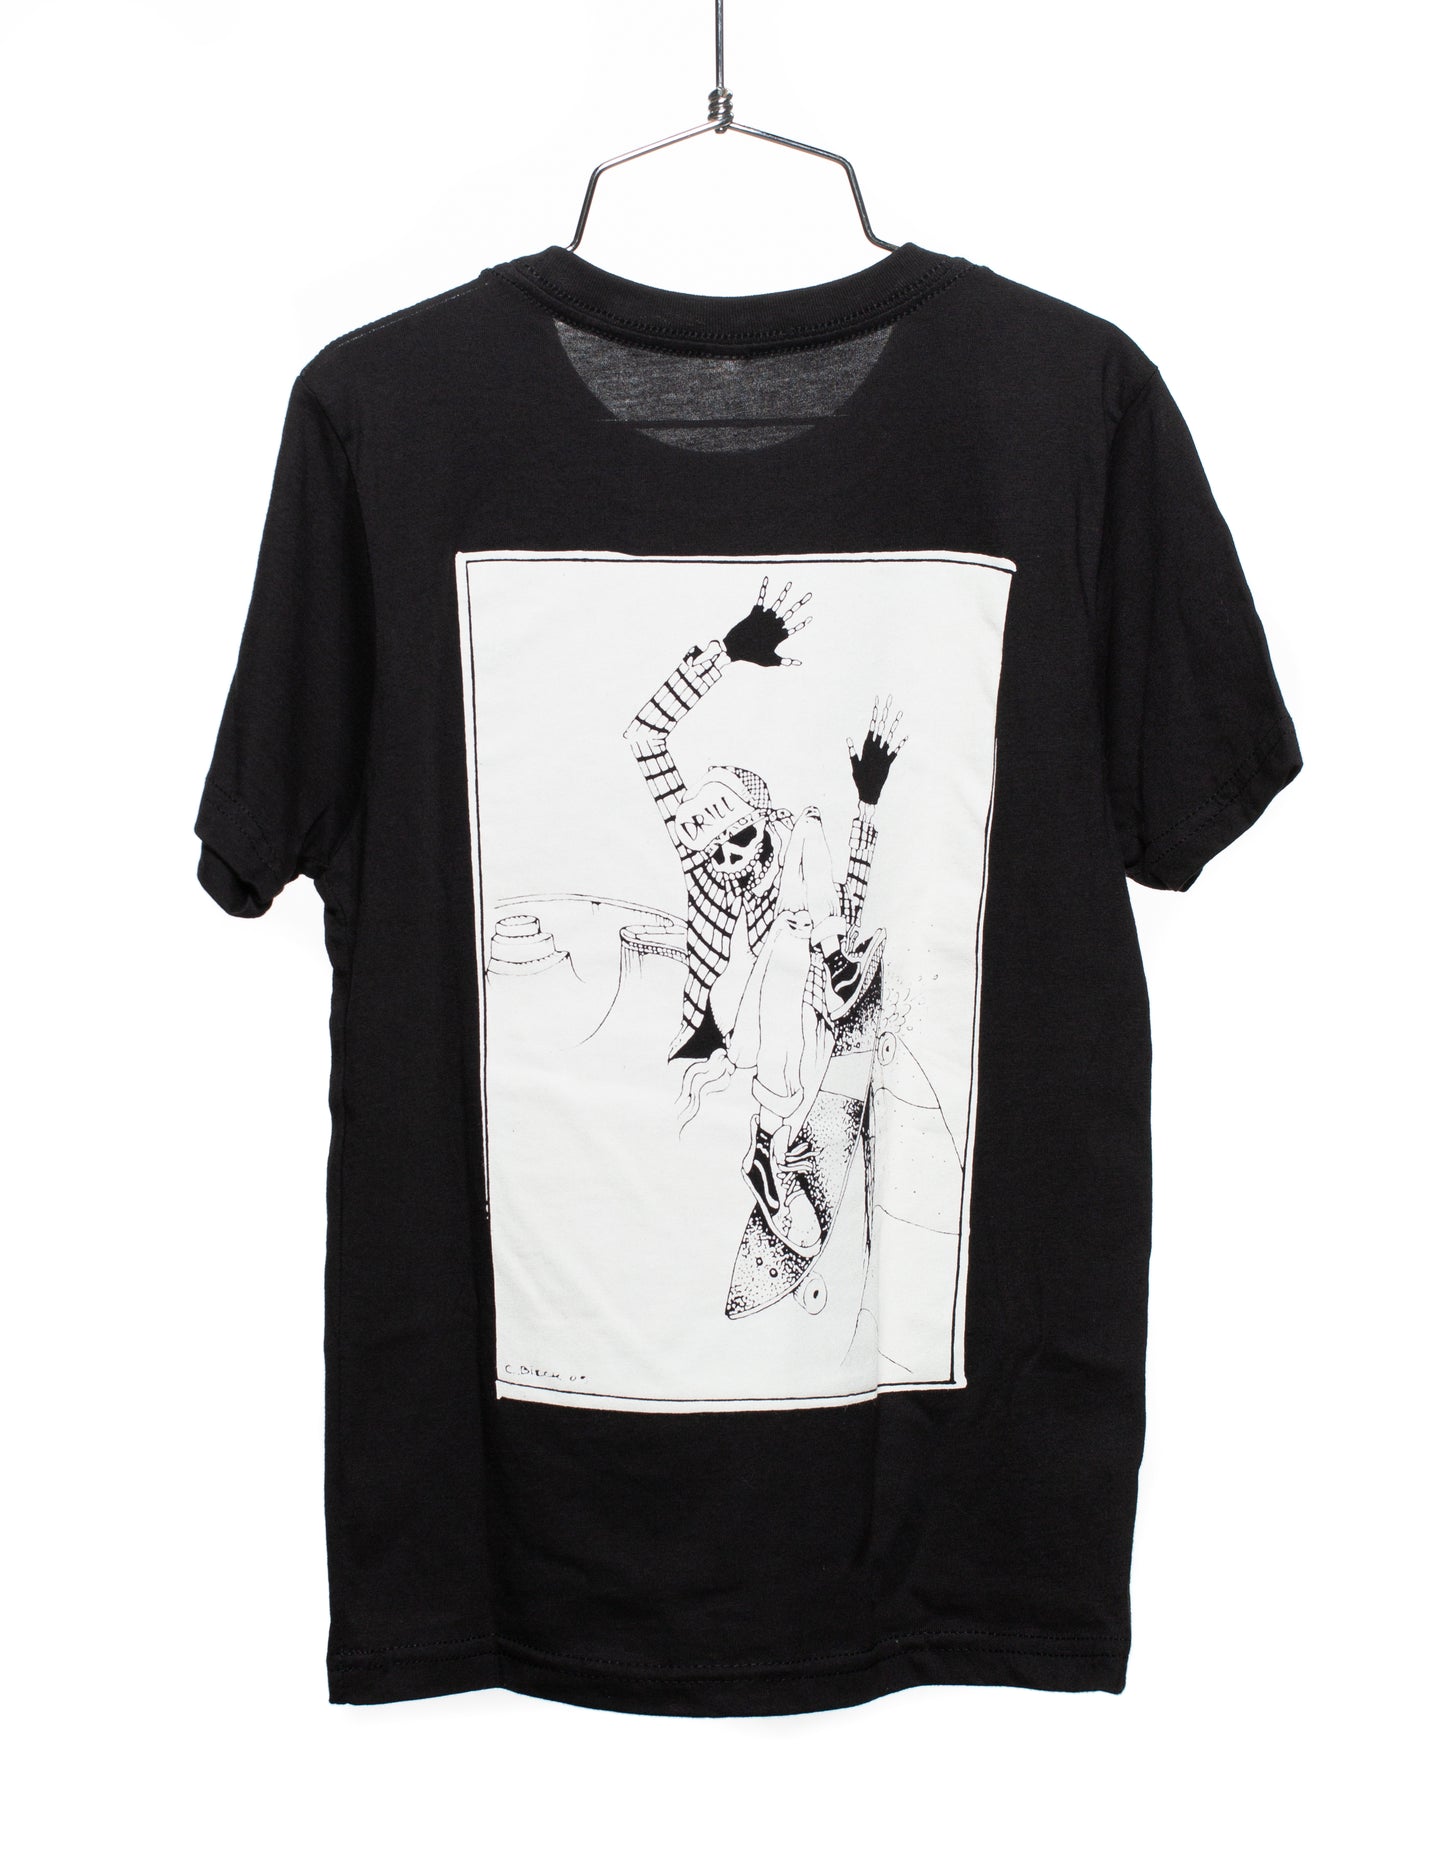 Pool Skater Youth Tee